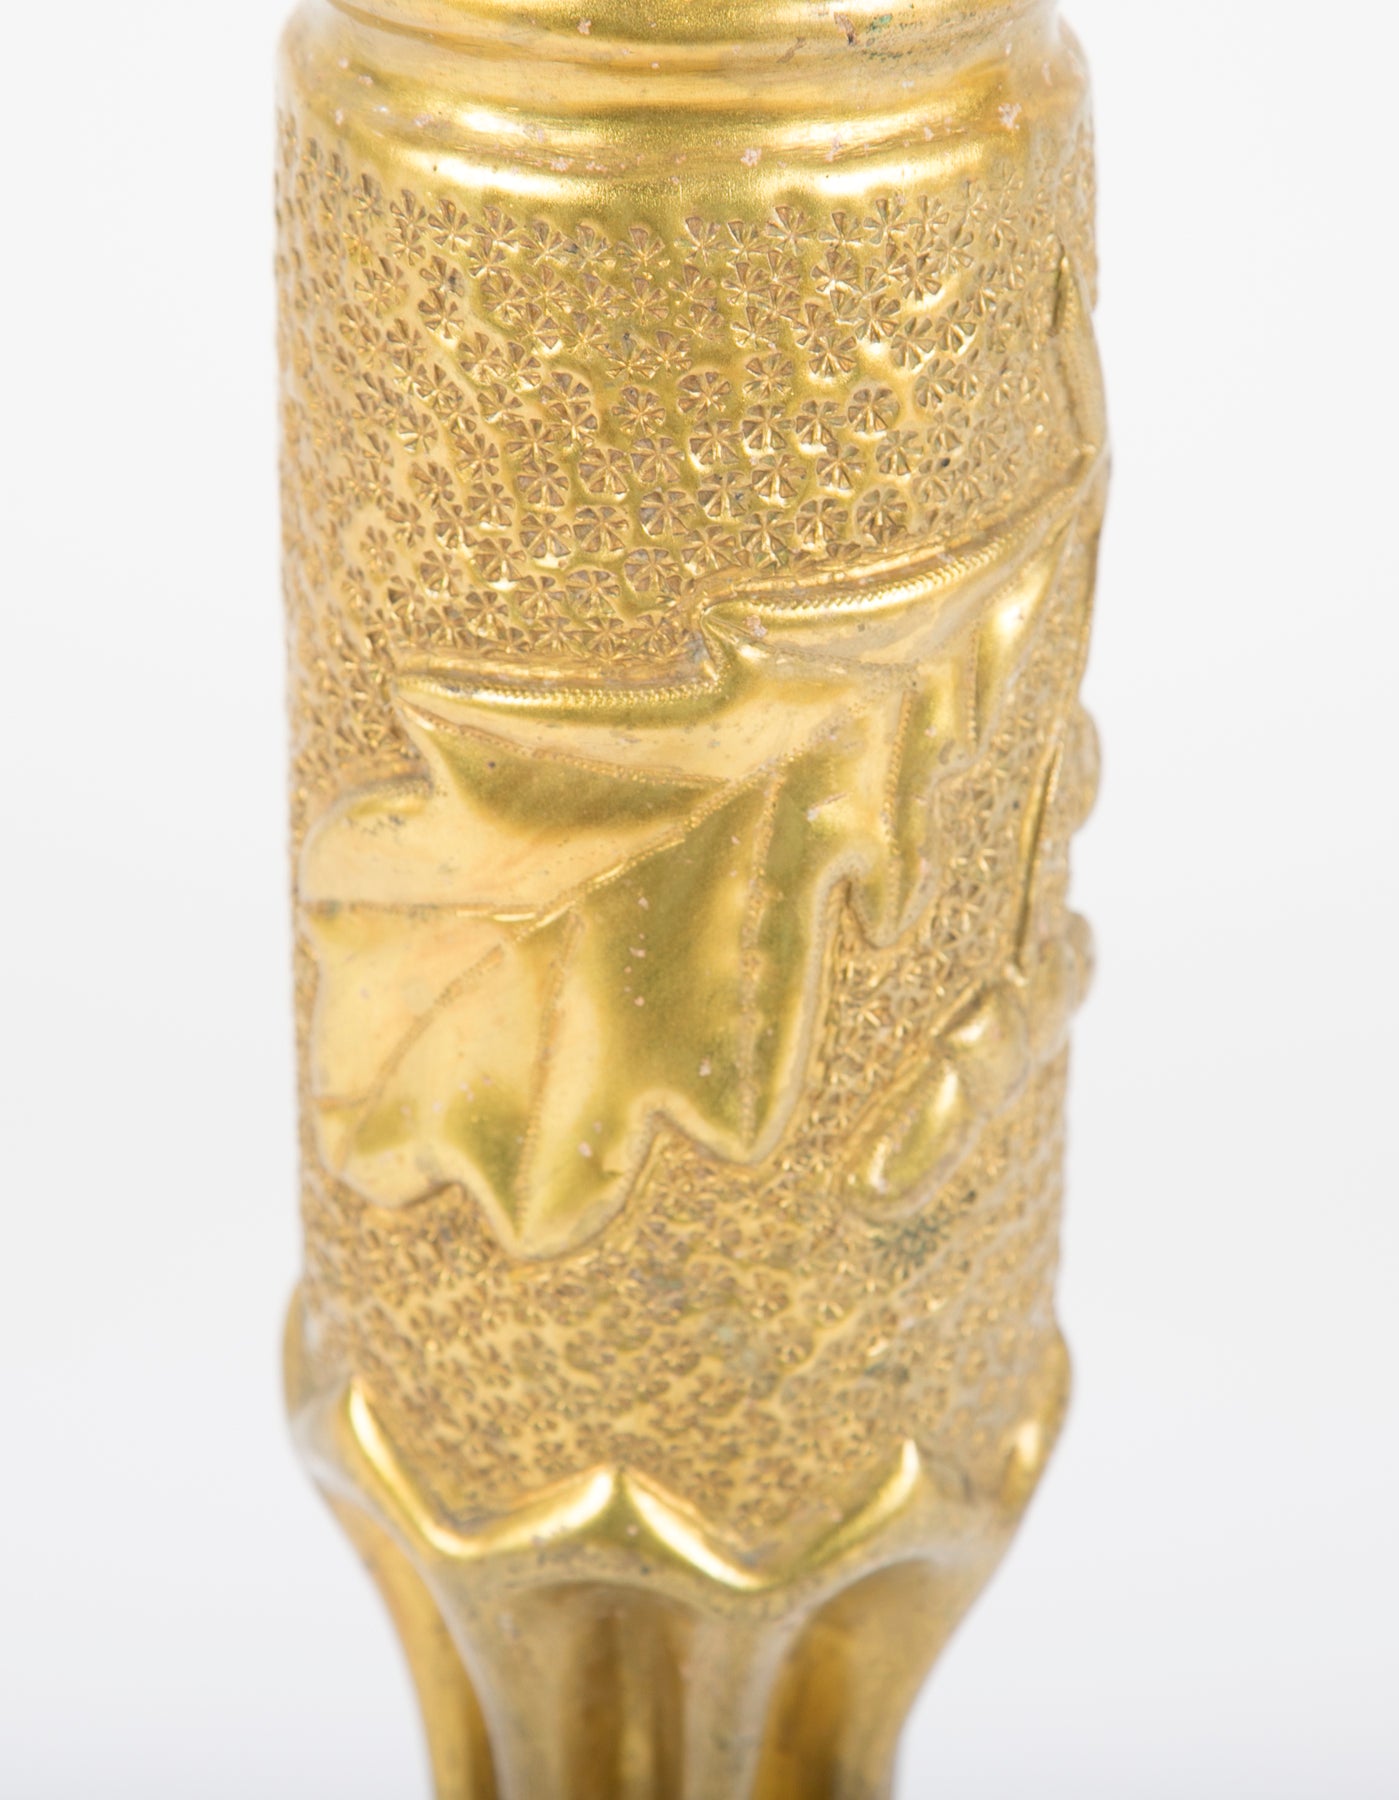 Decorative French Artillery 75mm Shell Case with Raised Floral Motif by WW  I. Trench Art on Parigi Books